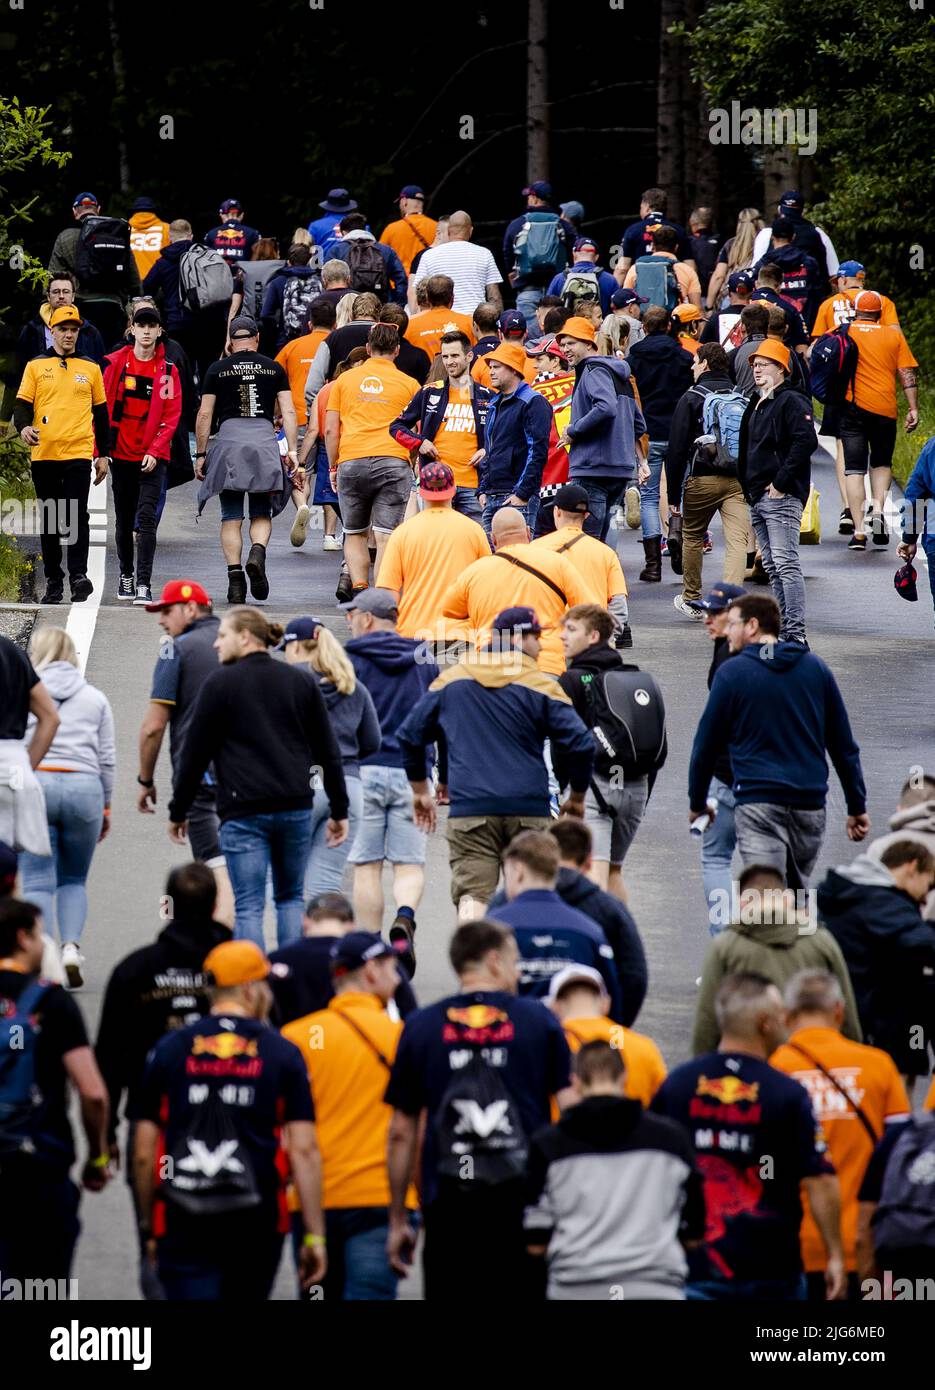 Spielberg, Austria. 08/07/2022, SPIELBERG - Fans of Max Verstappen arrive for the 1st practice session ahead of the F1 Grand Prix of Austria at the Red Bull Ring on July 8, 2022 in Spielberg, Austria. ANP SEM VAN DER WAL Credit: ANP/Alamy Live News Stock Photo